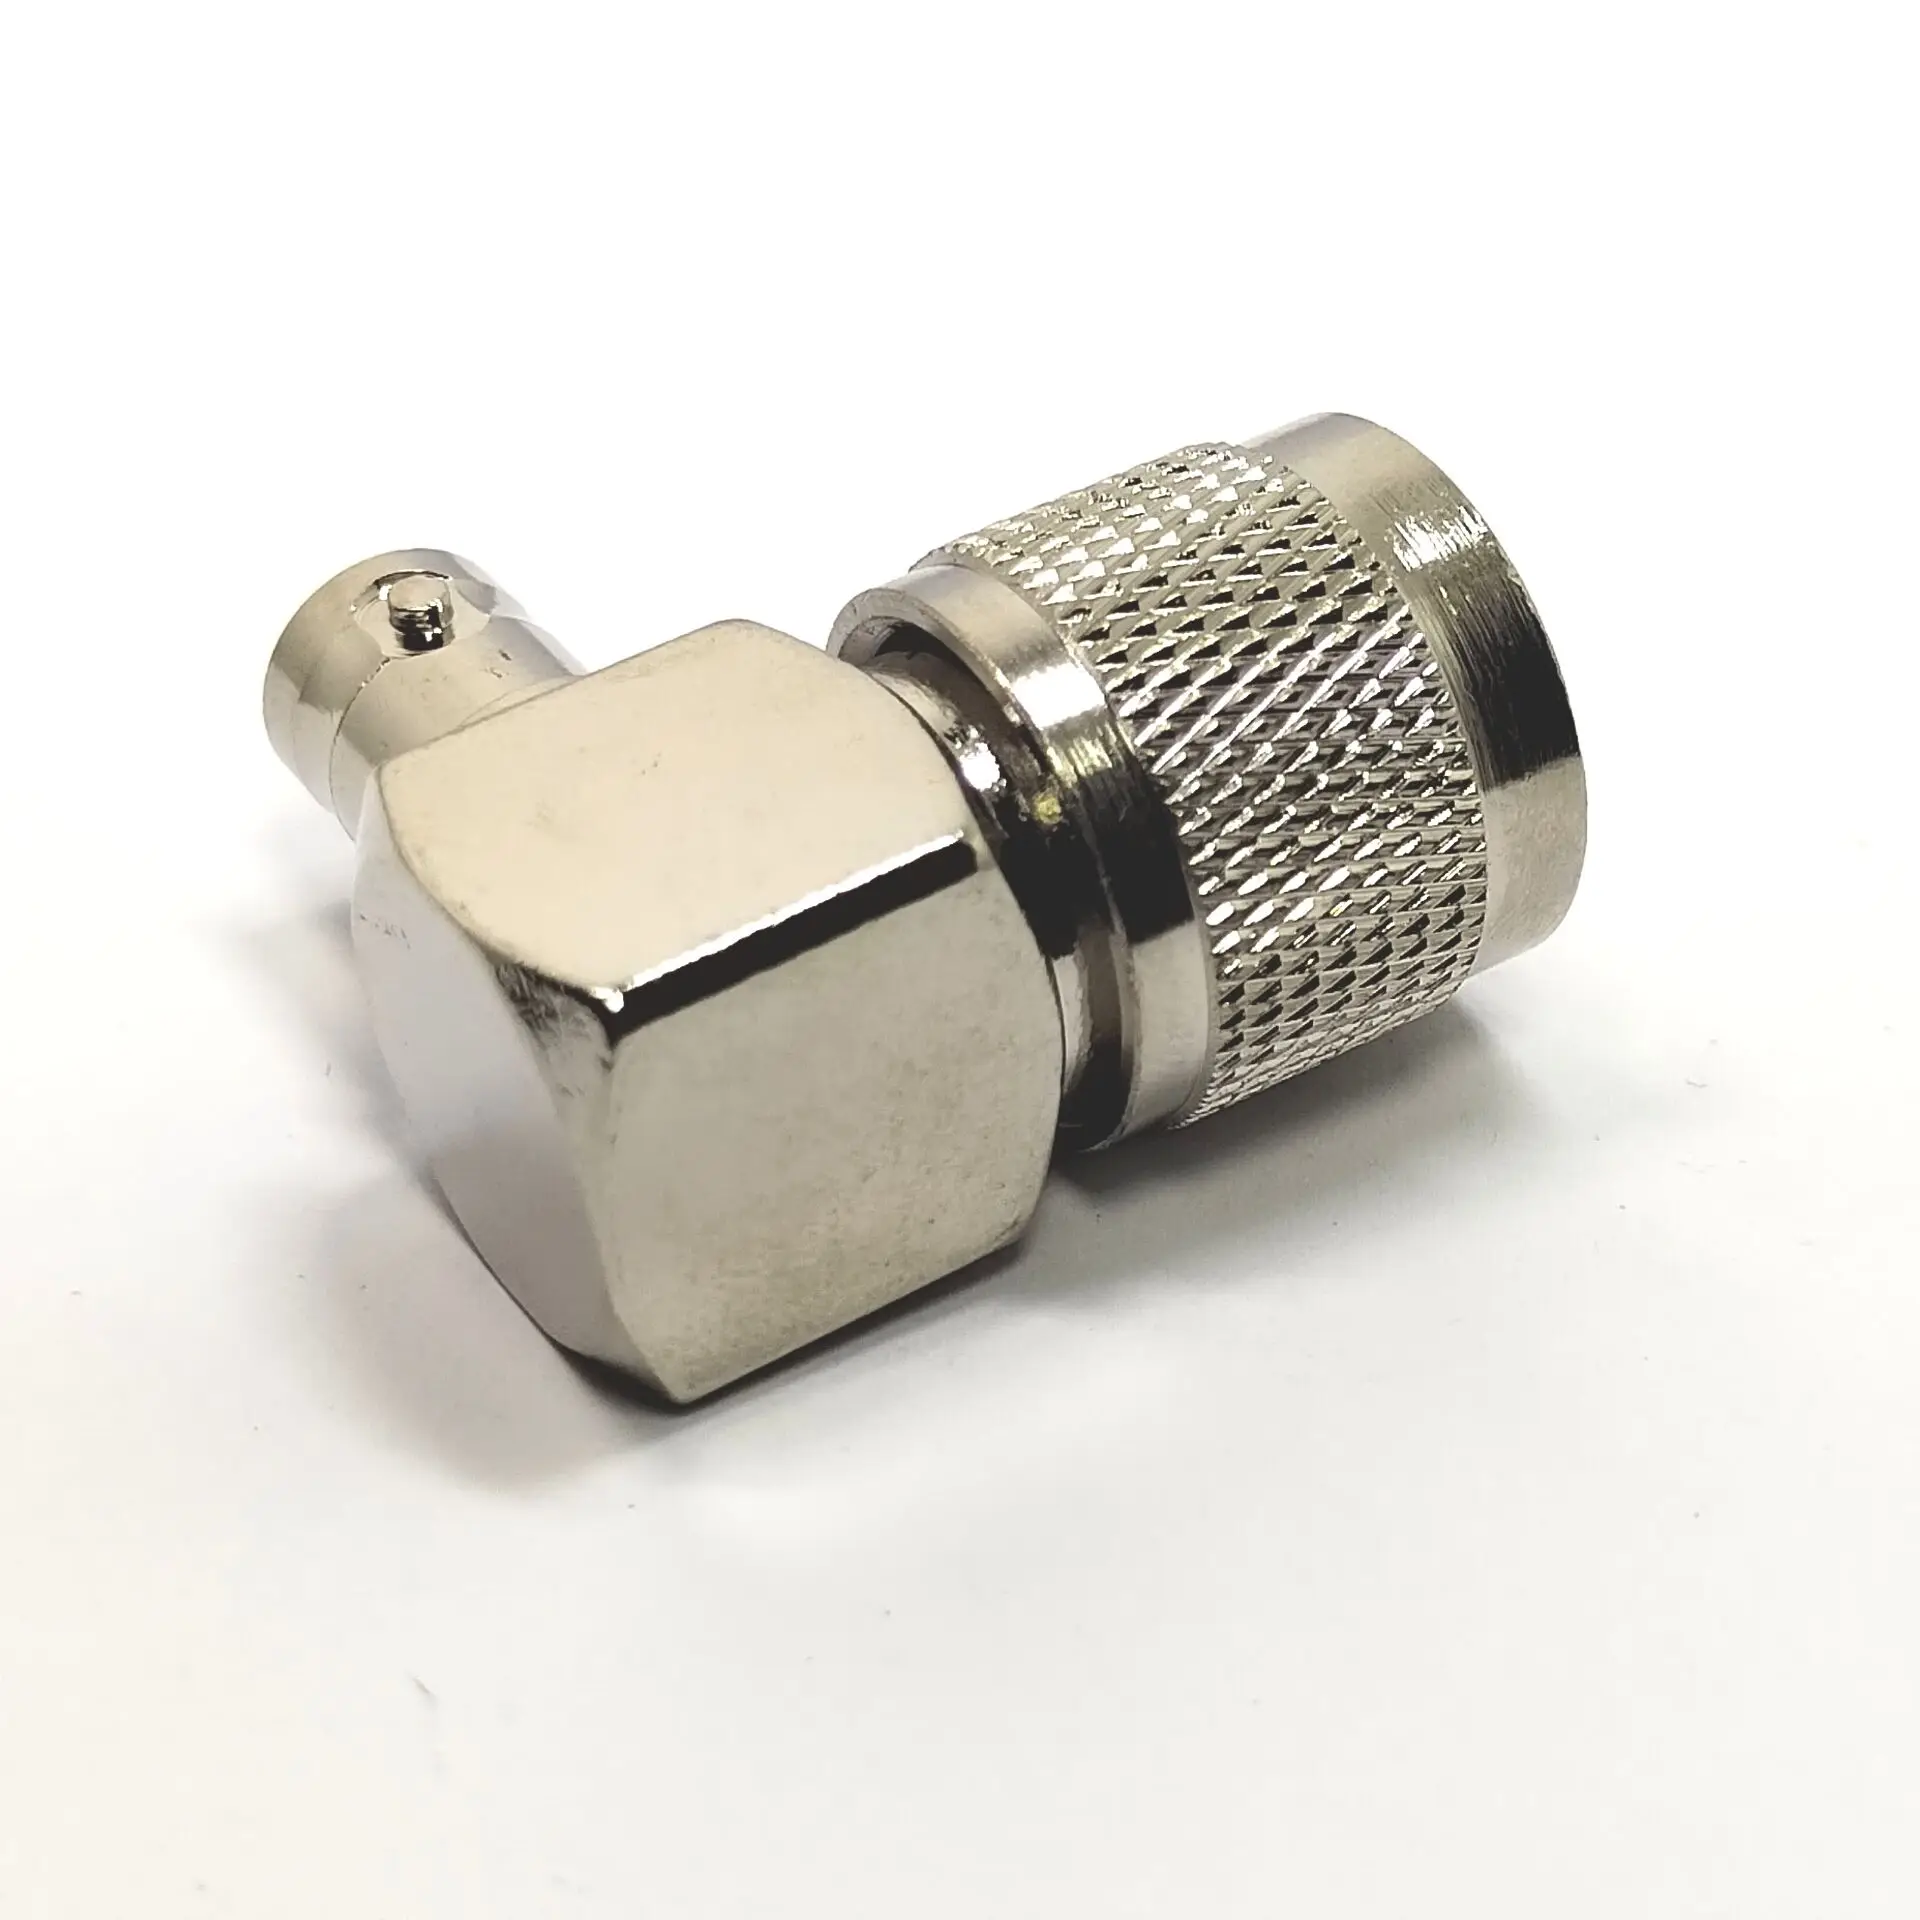 Nickel plated Rf Connector BNC Female To UHF PL259 Male Right Angle Adapter in stock manufacture